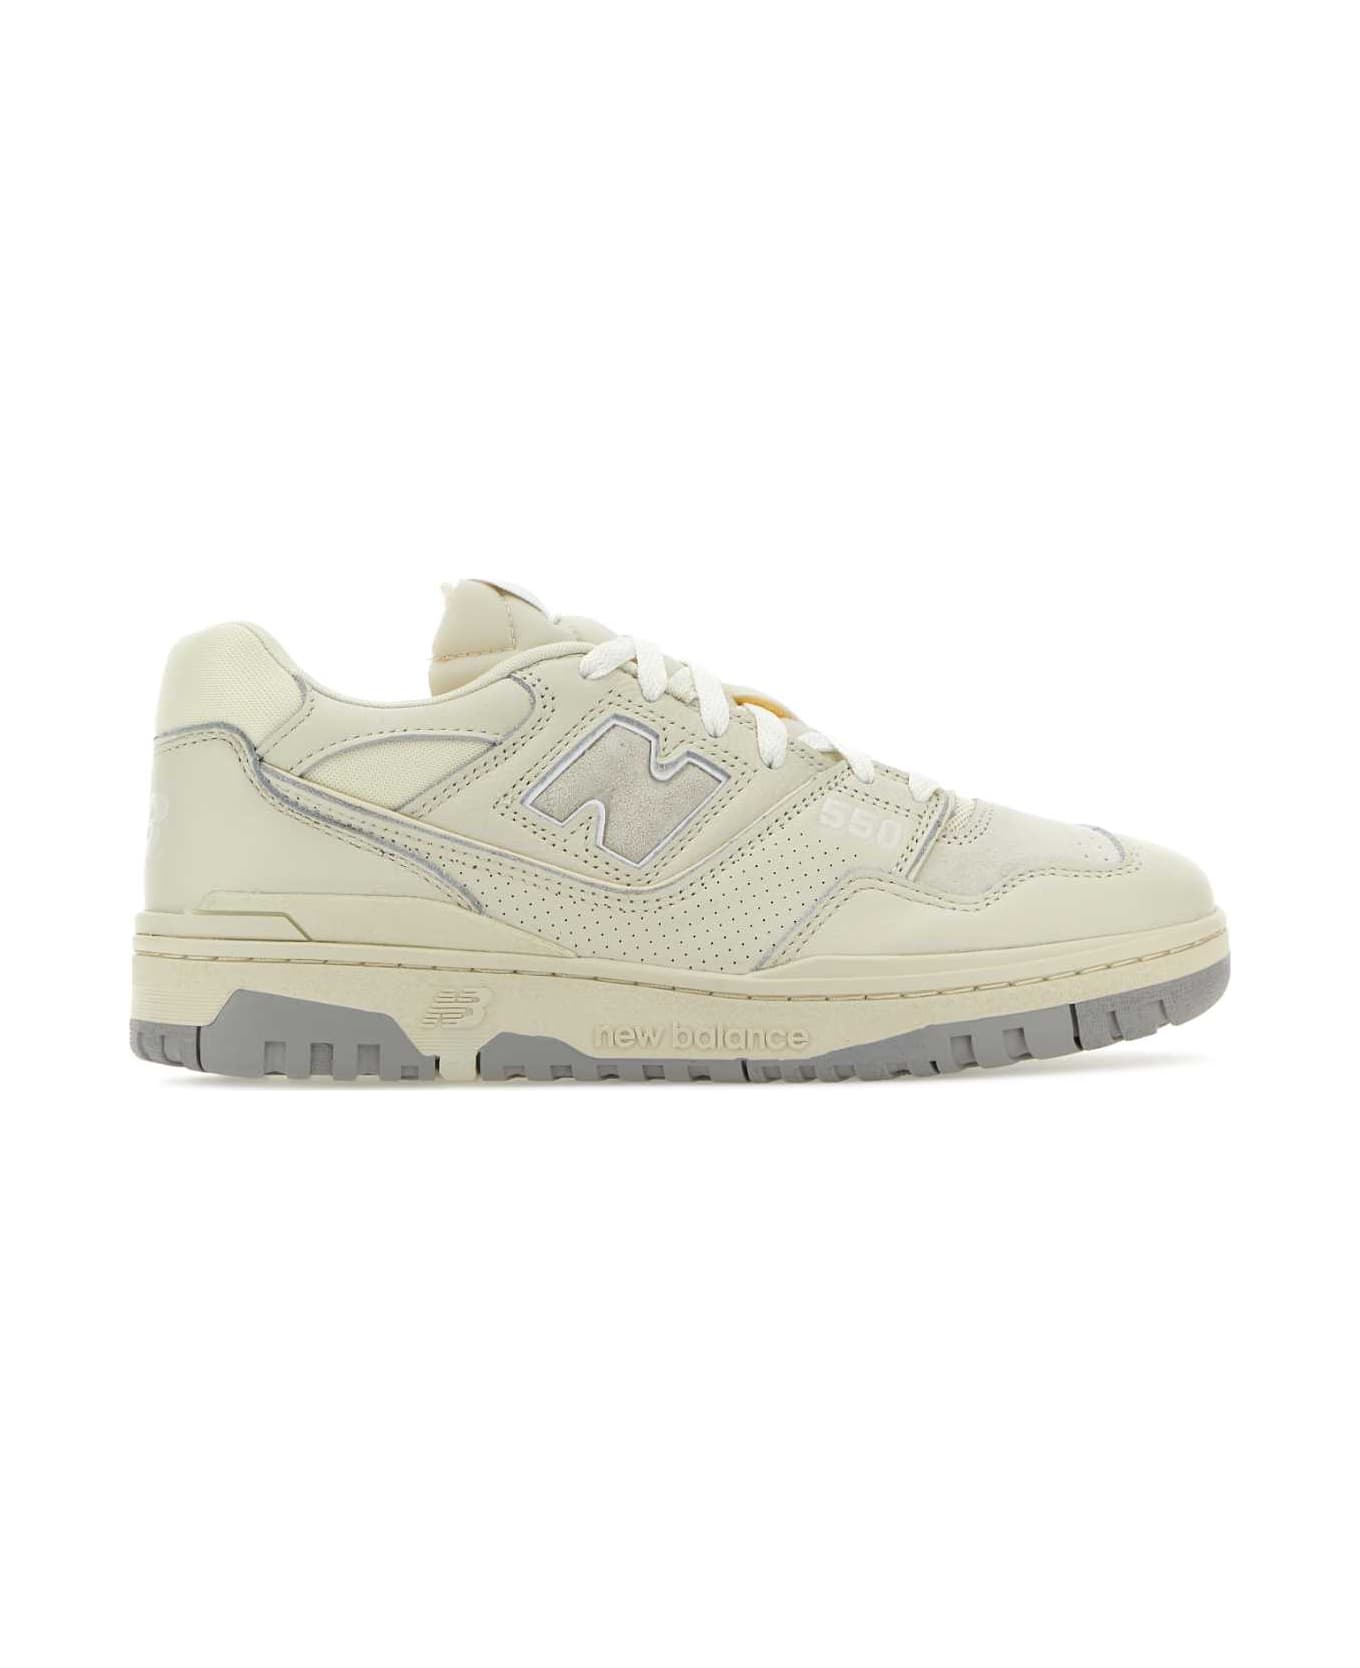 New Balance Sand Leather And Suede 550 Sneakers - TURTLEDOVE